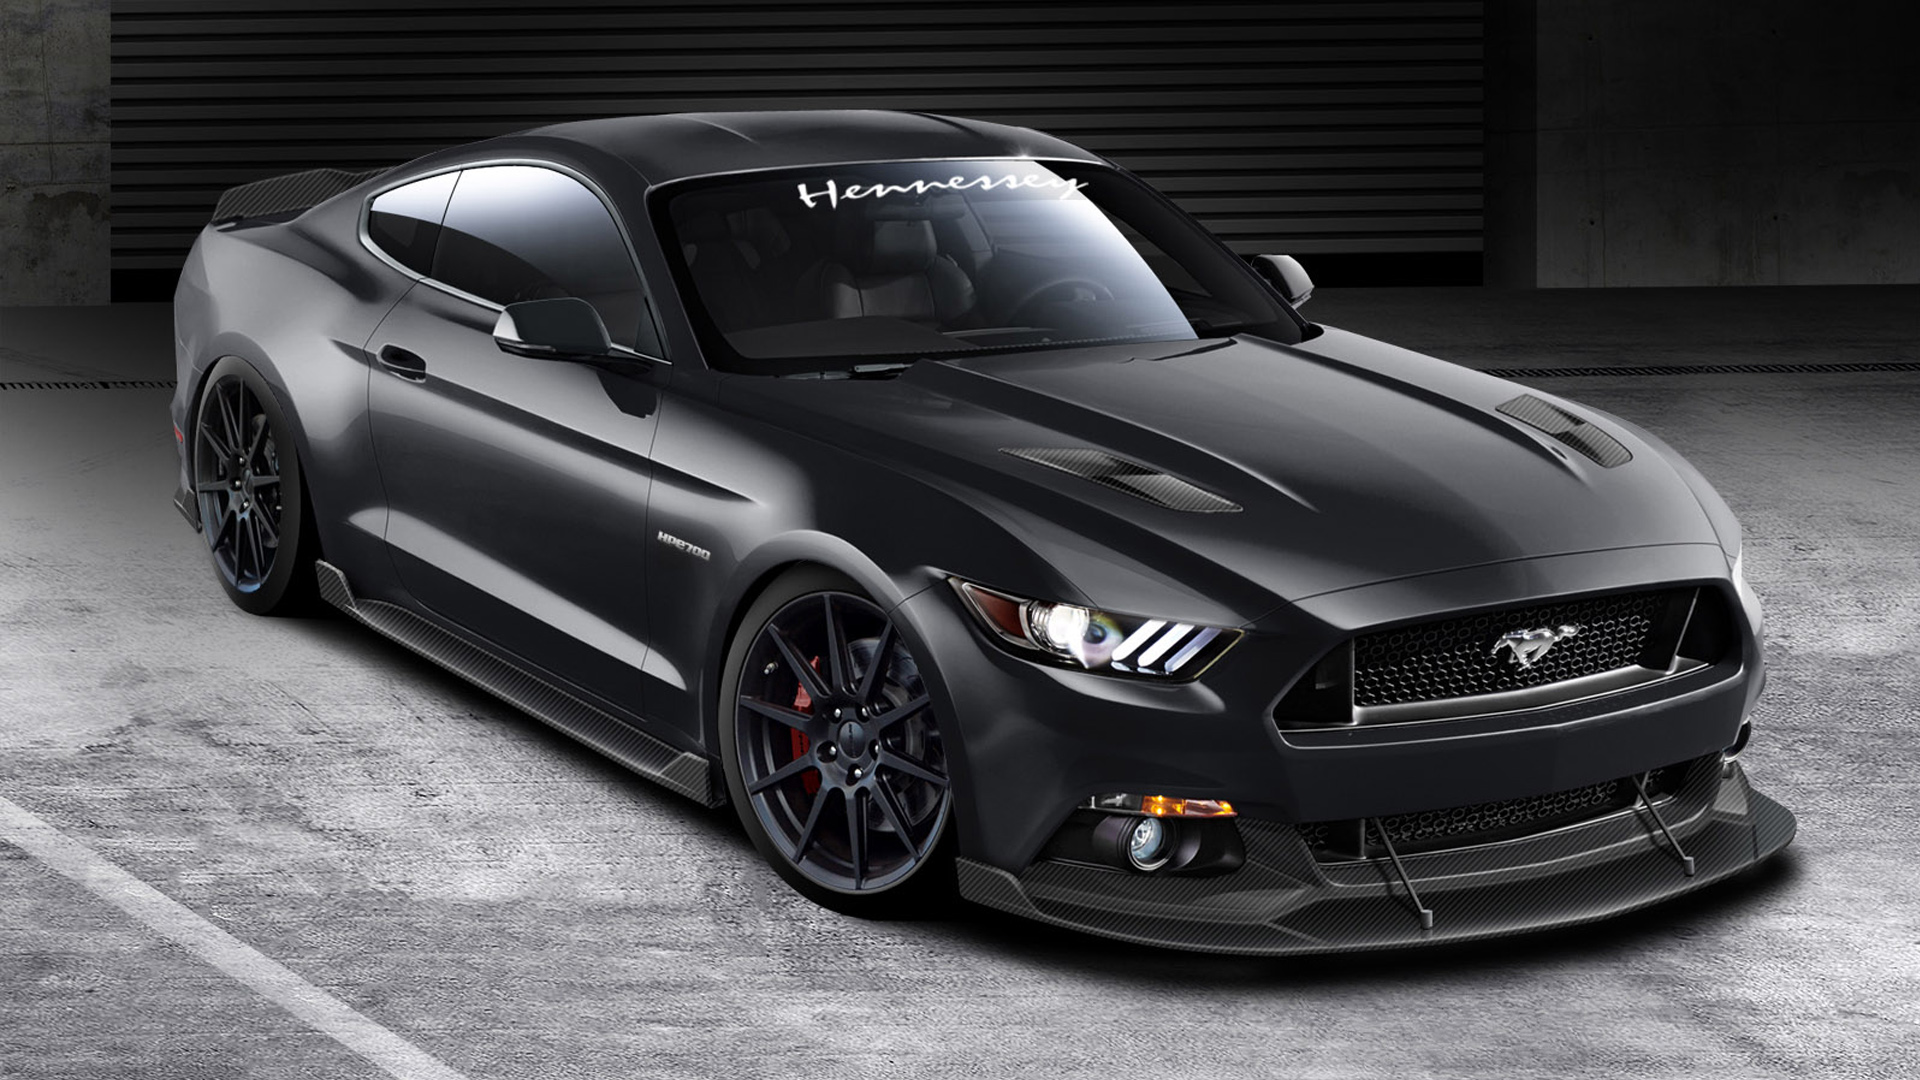 2015 Hennessey Ford Mustang GT